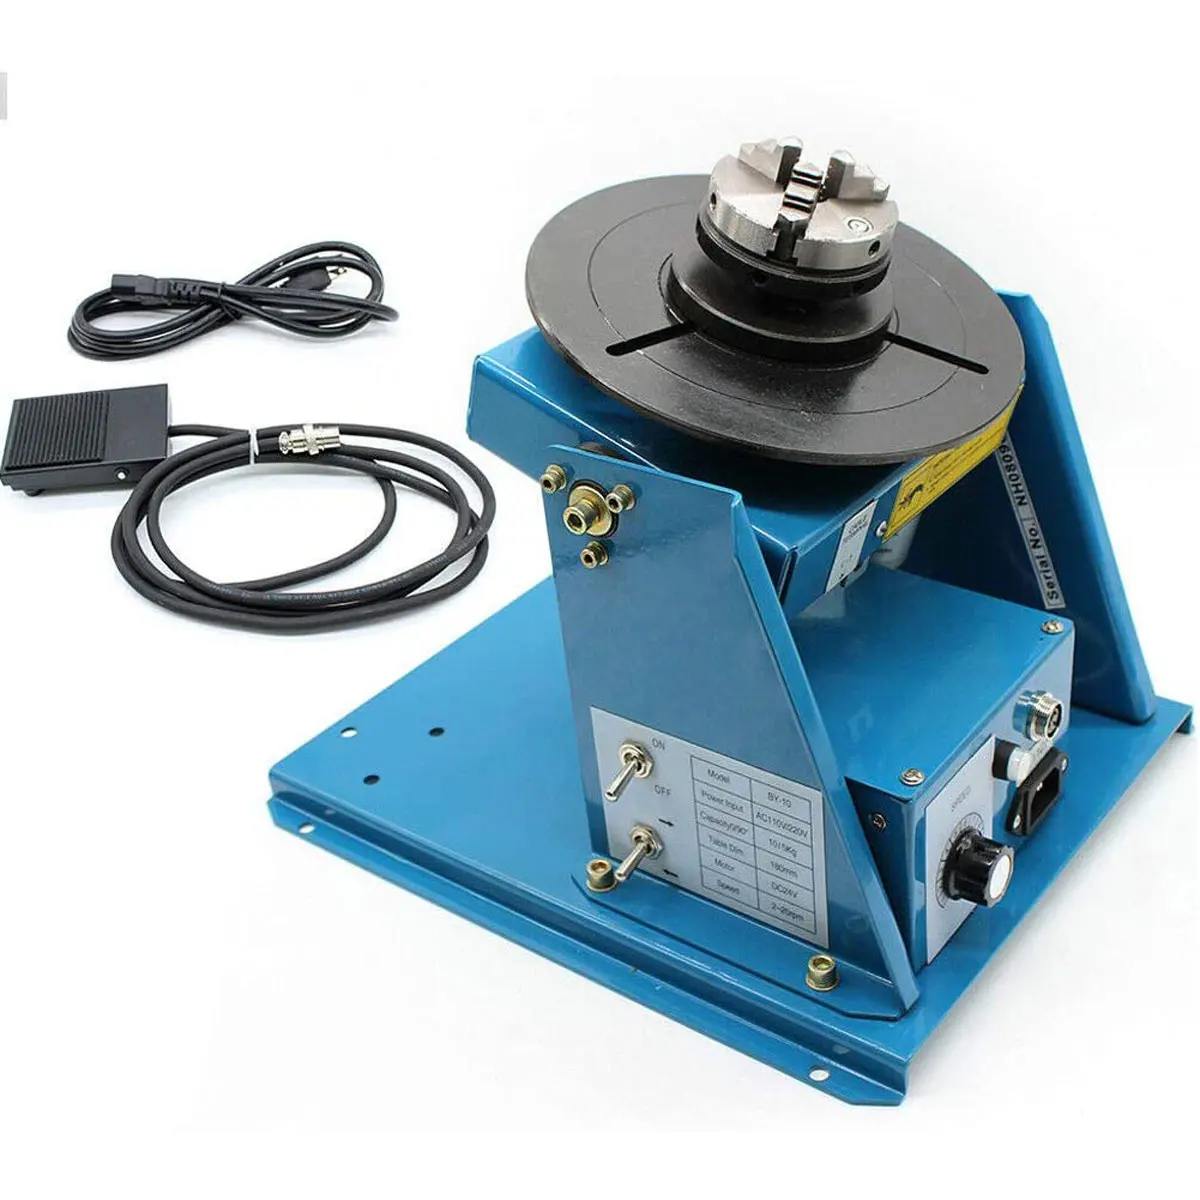 

10KG Rotary Welding Positioner Turntable Table High Positioning Accuracy Suitable for Cutting, Grinding, Assembly